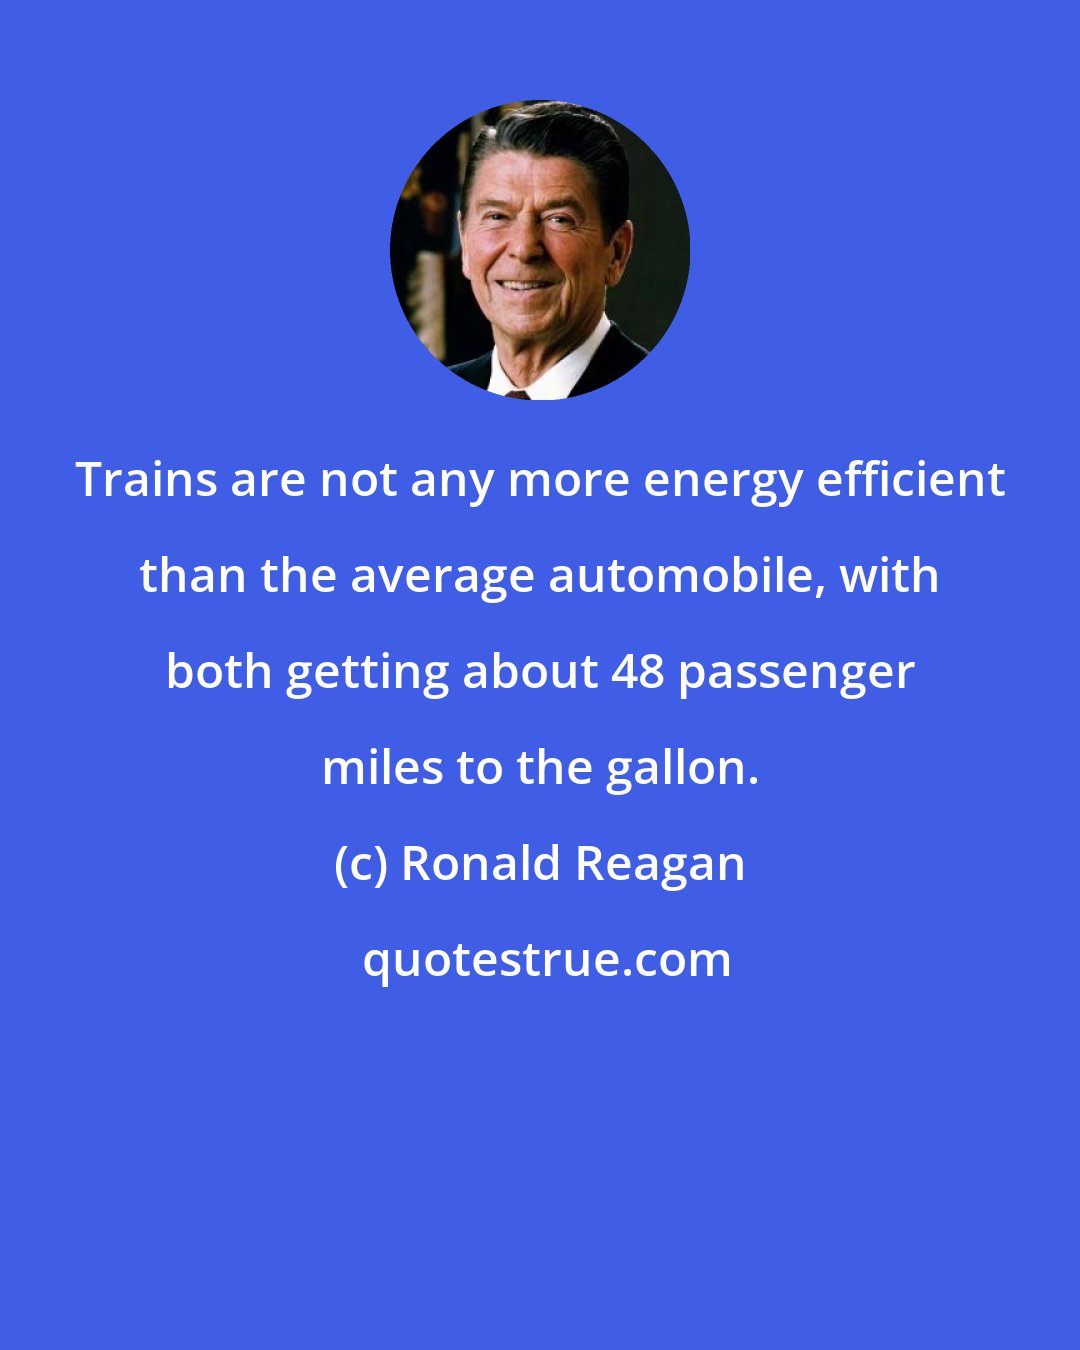 Ronald Reagan: Trains are not any more energy efficient than the average automobile, with both getting about 48 passenger miles to the gallon.